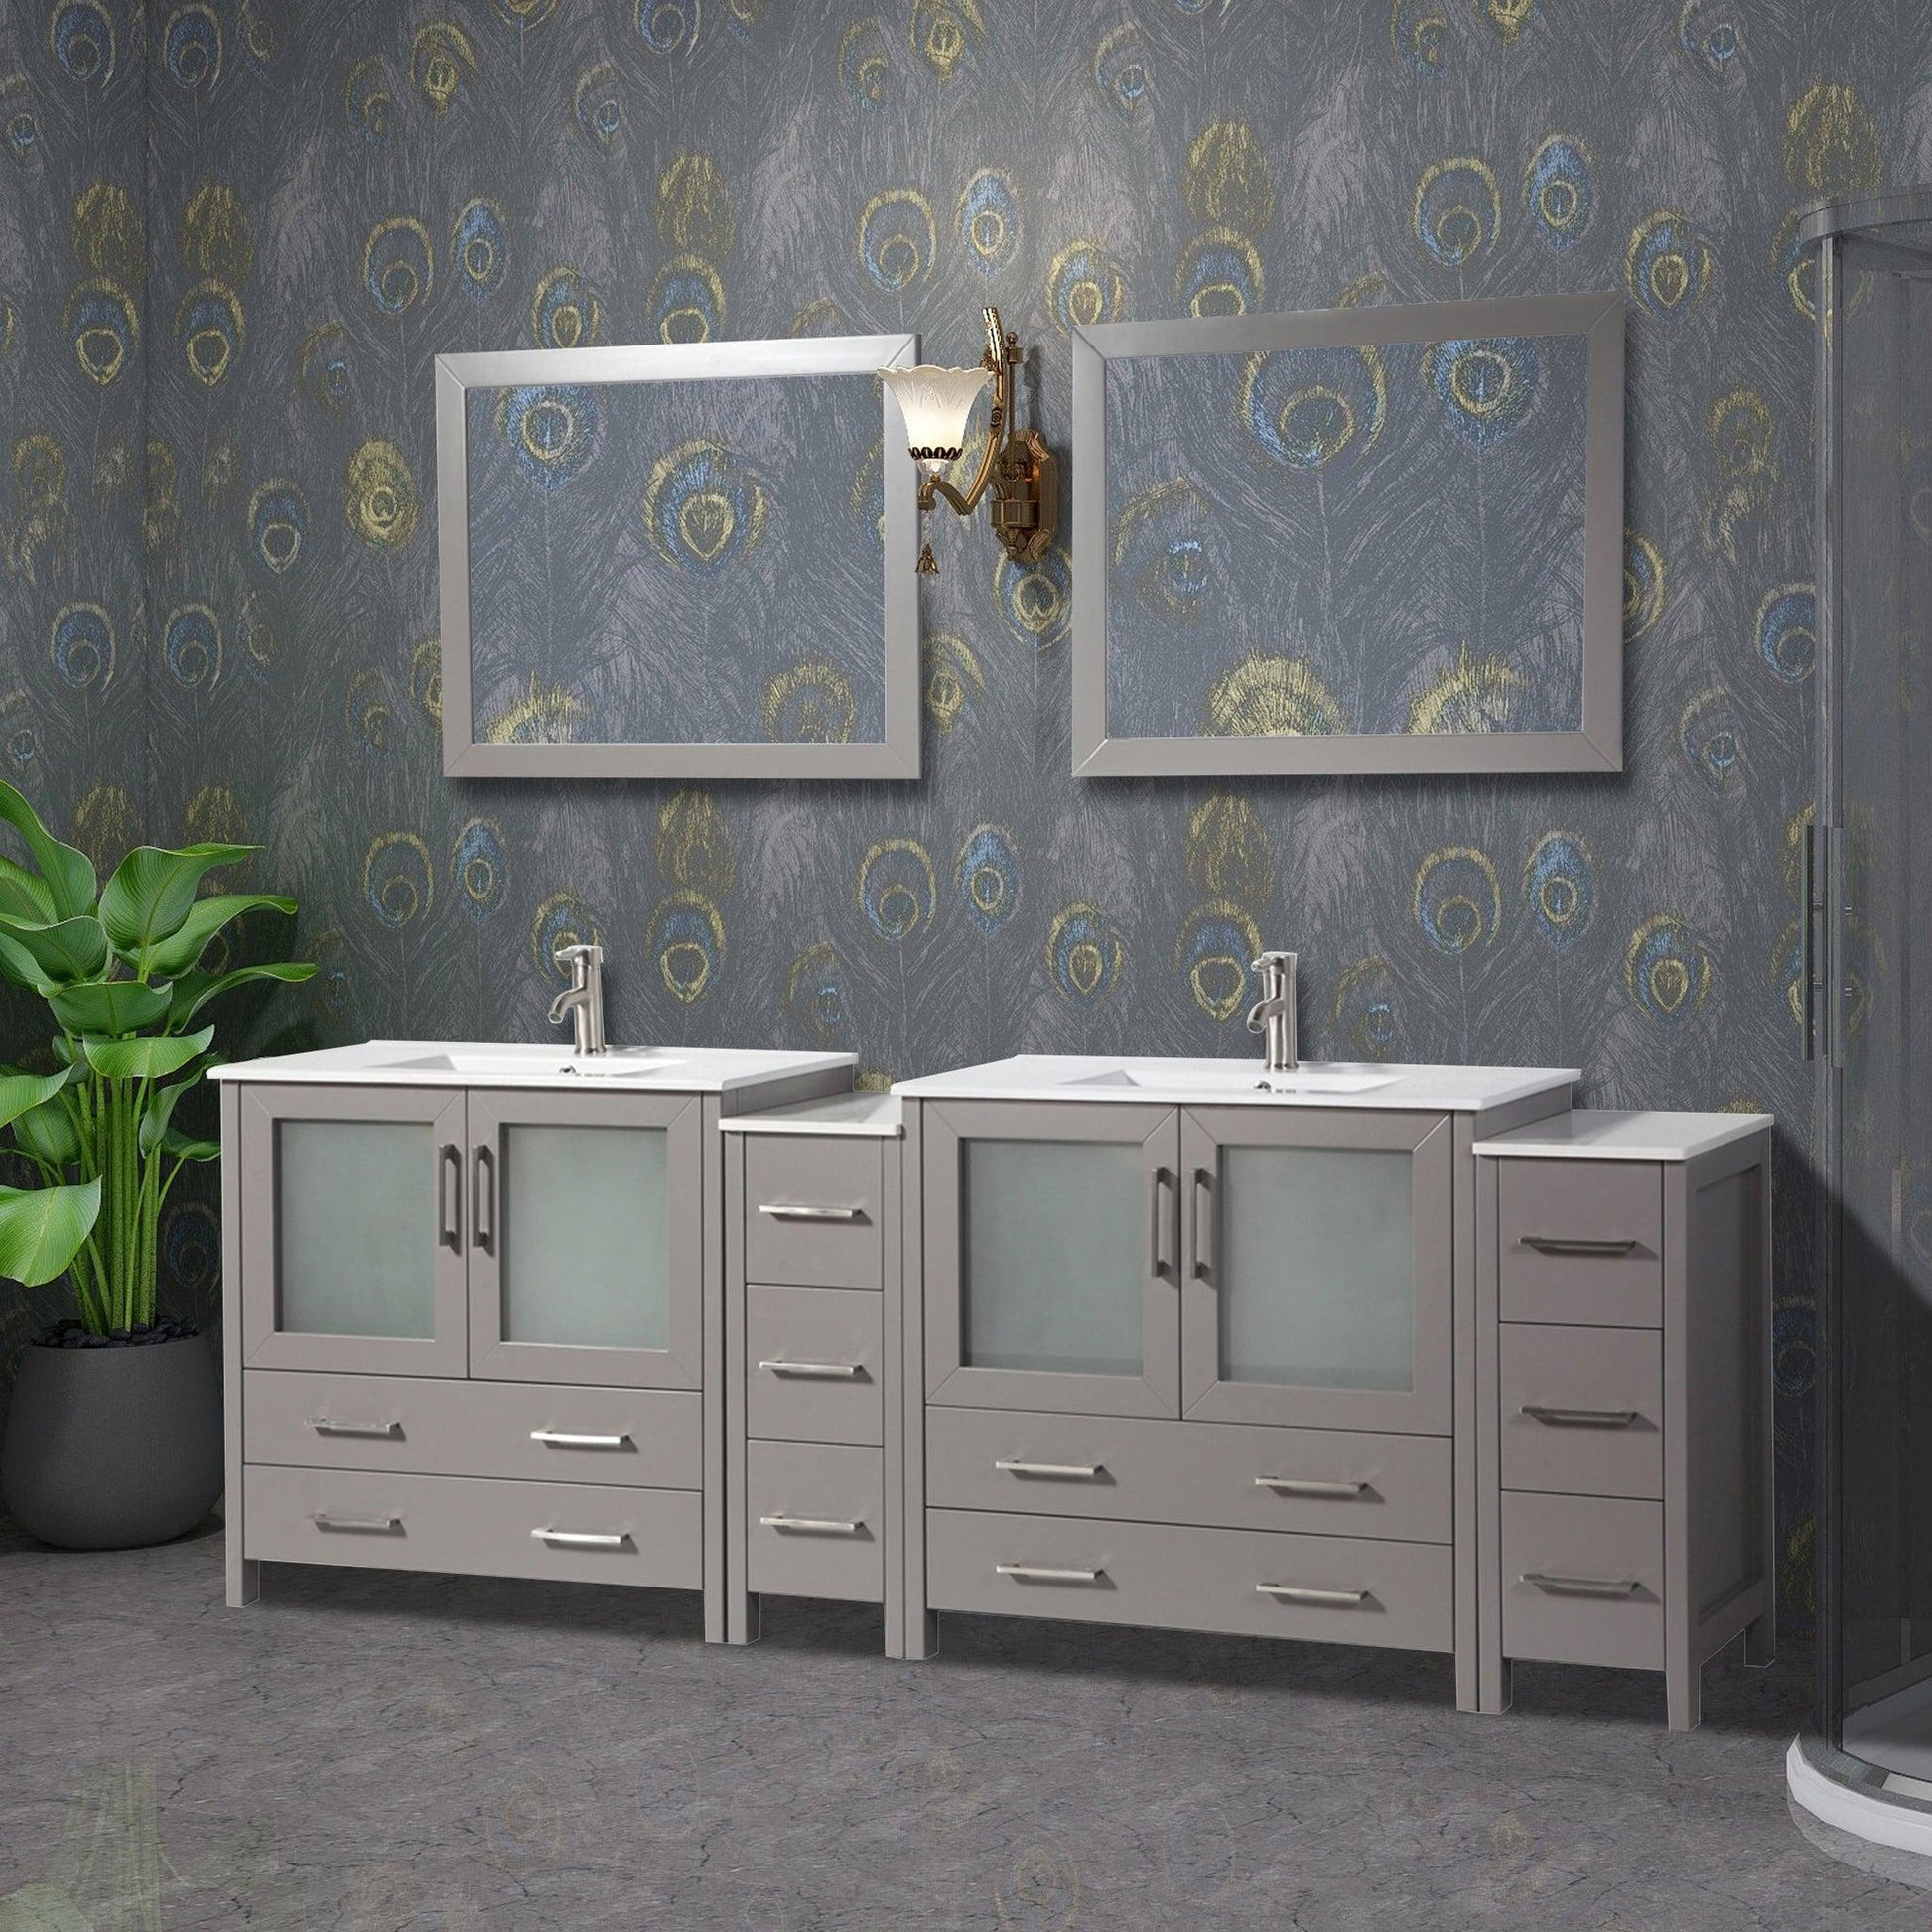 Vanity Art Brescia 96" Double Gray Freestanding Modern Bathroom Vanity Set With Ceremic Top, 2-Side Cabinets and 2 Mirrors